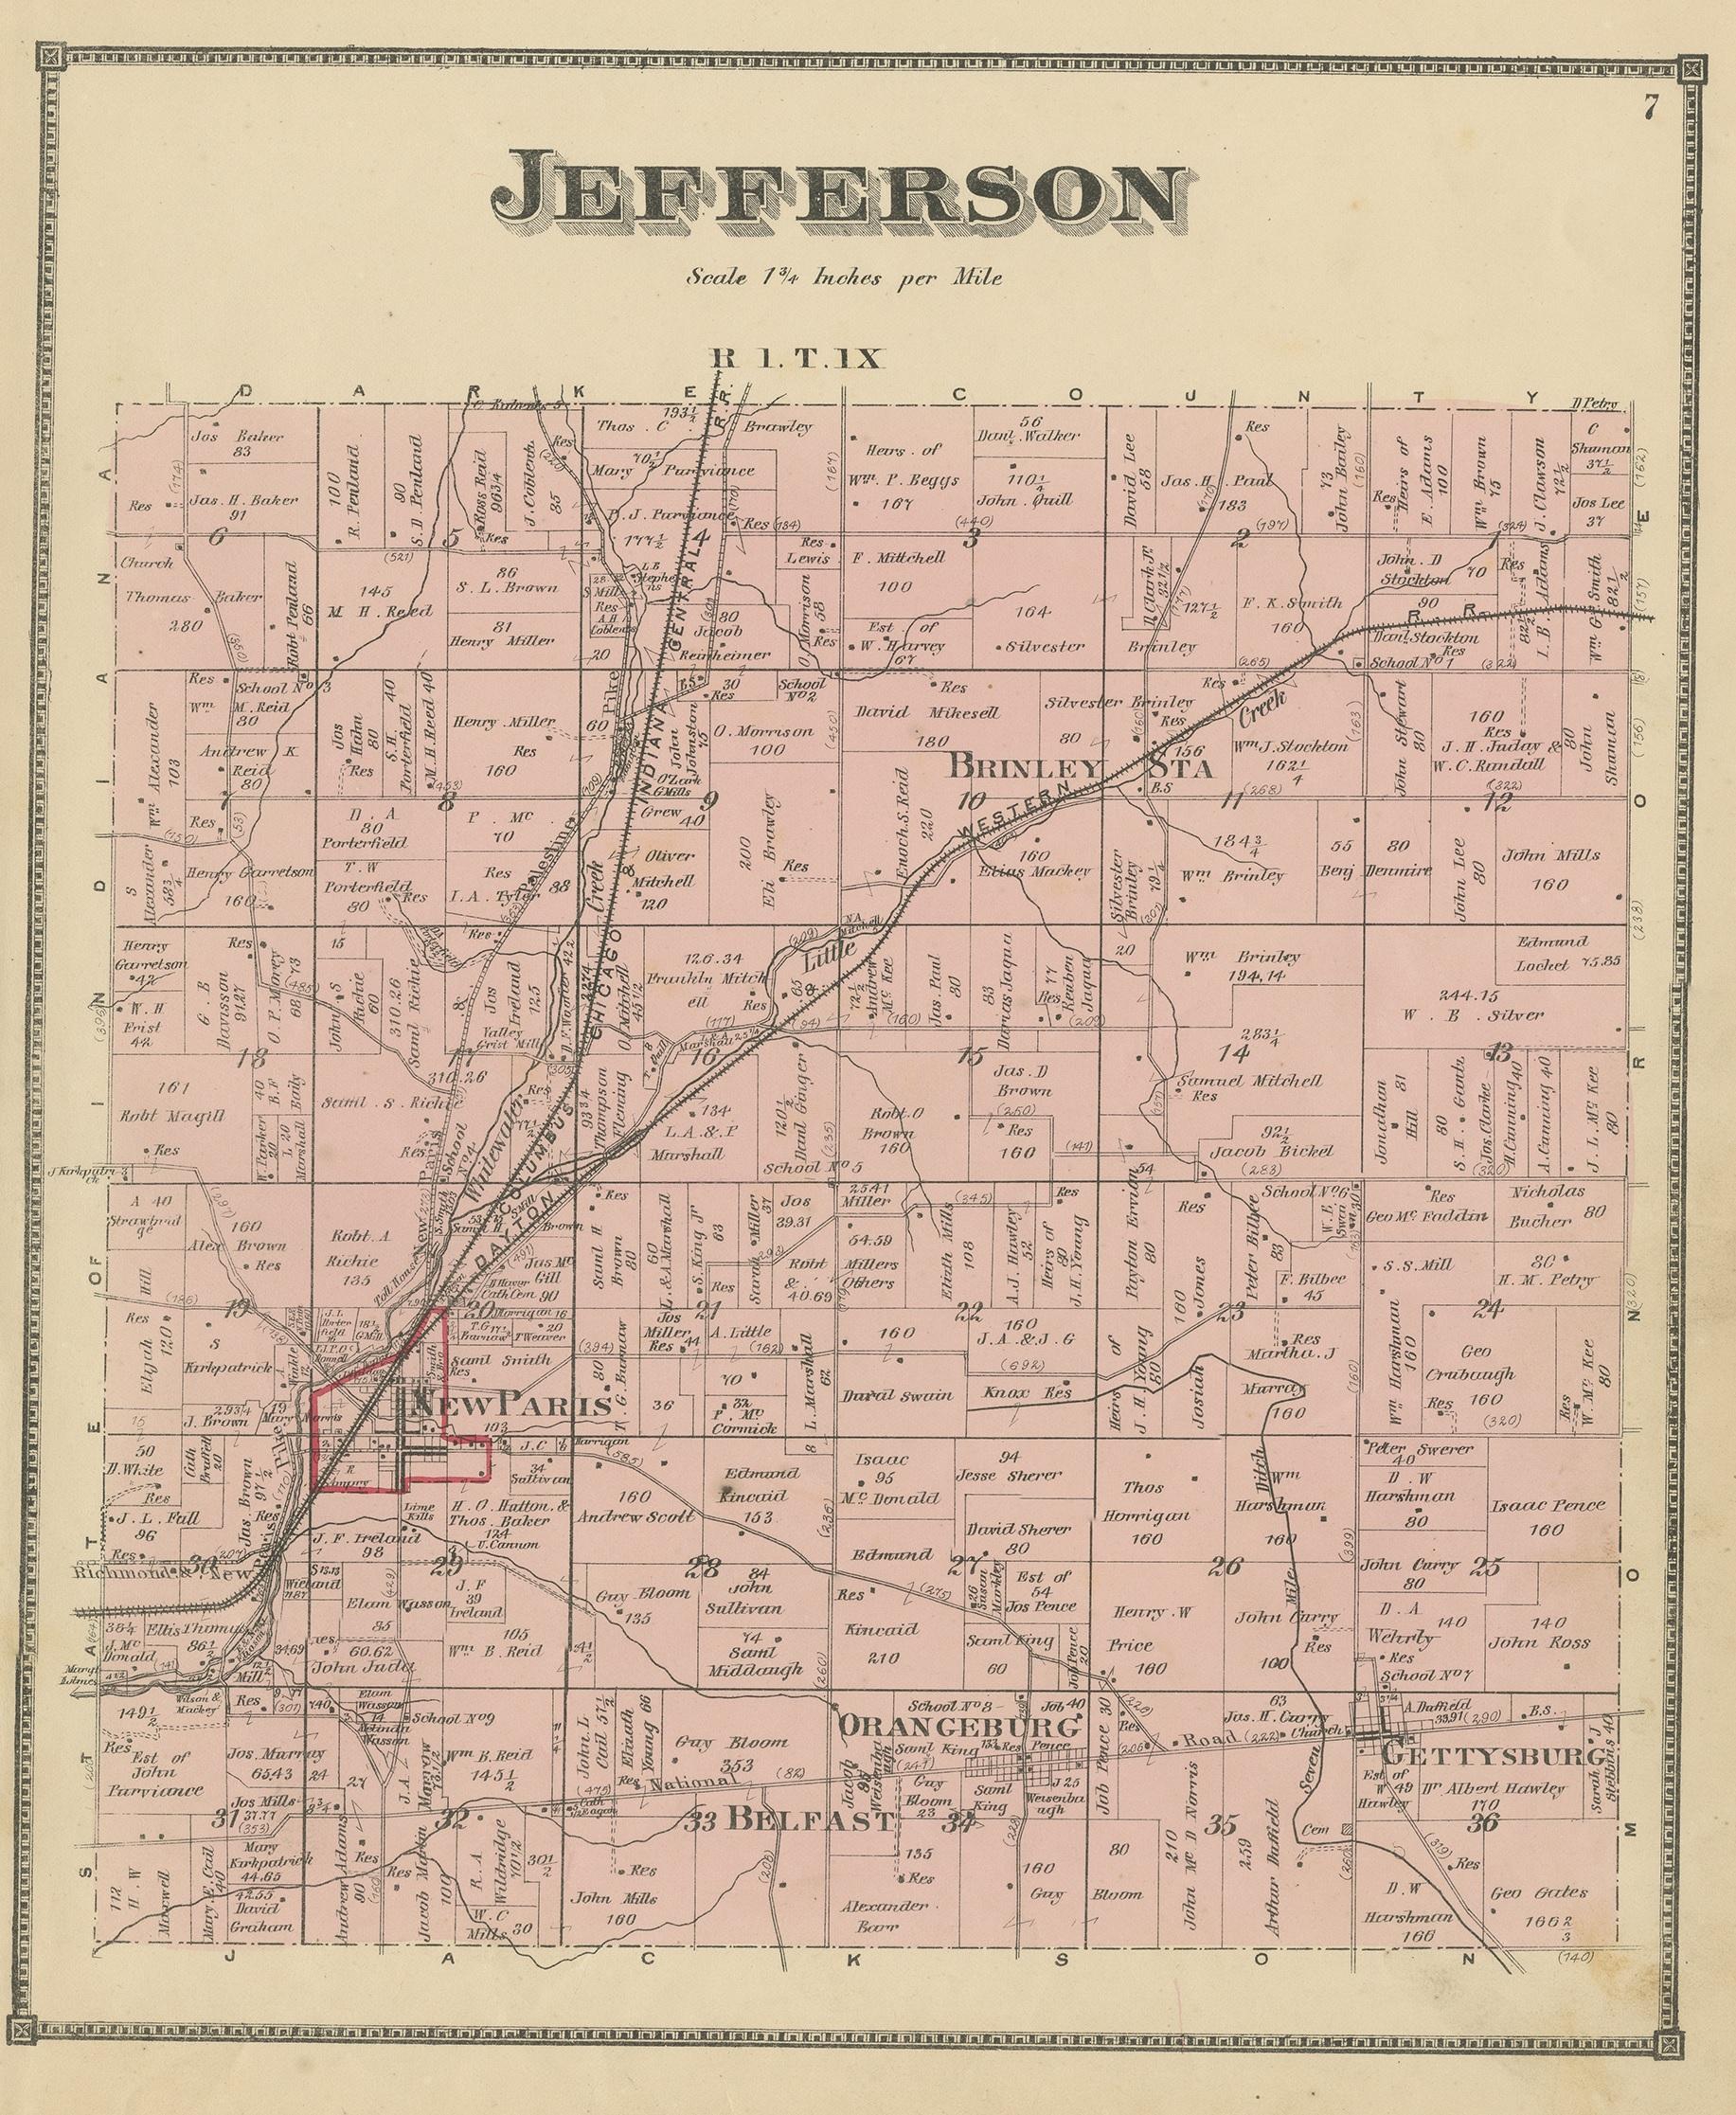 Antique map titled 'Jefferson'. Original antique map of Jefferson, Ohio. This map originates from 'Atlas of Preble County Ohio' by C.O. Titus. Published 1871.